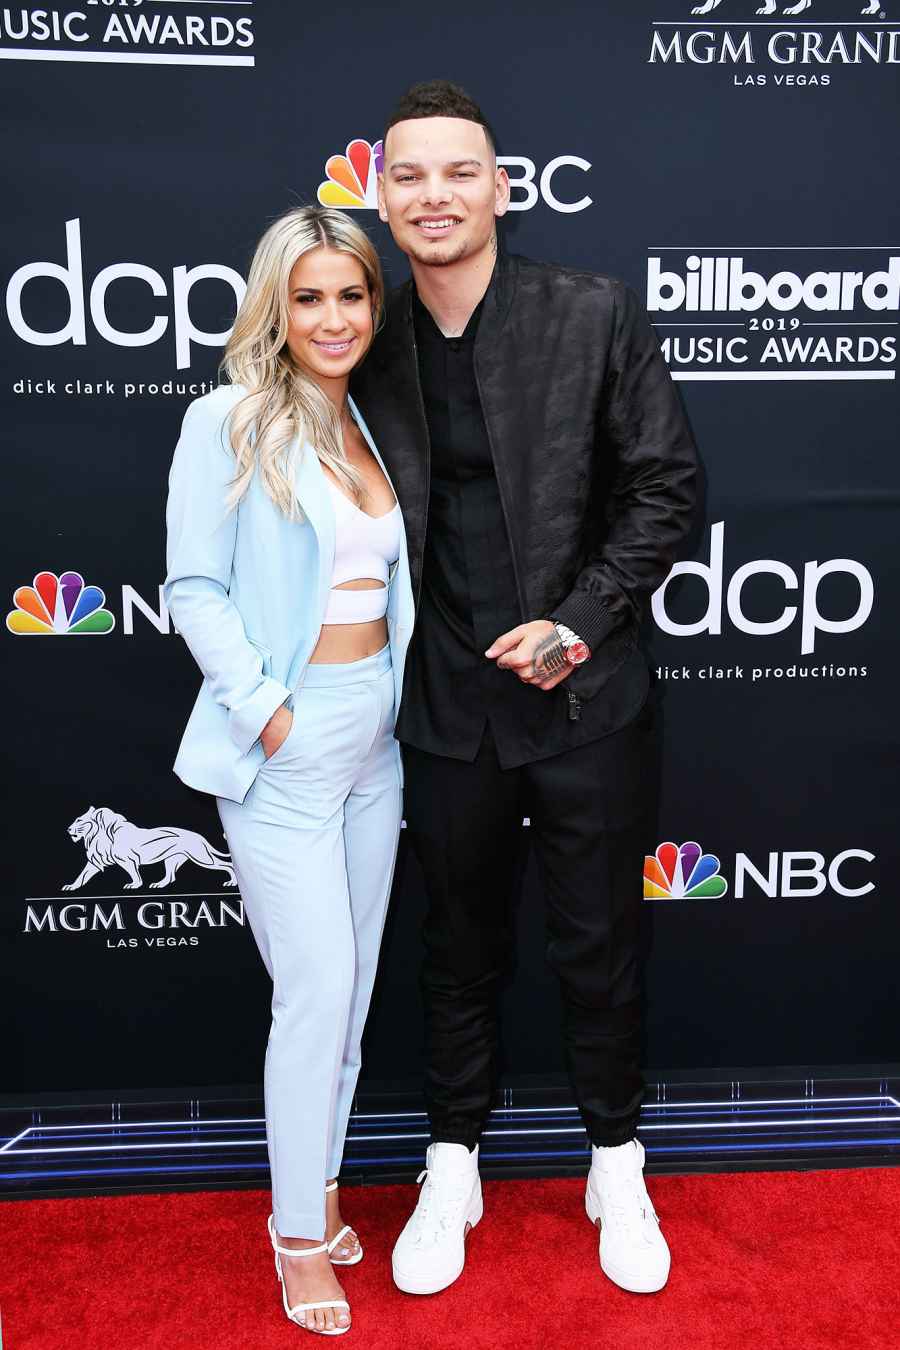 See the Hottest Couples at the BBMAs Katelyn Jae and Kane Brown